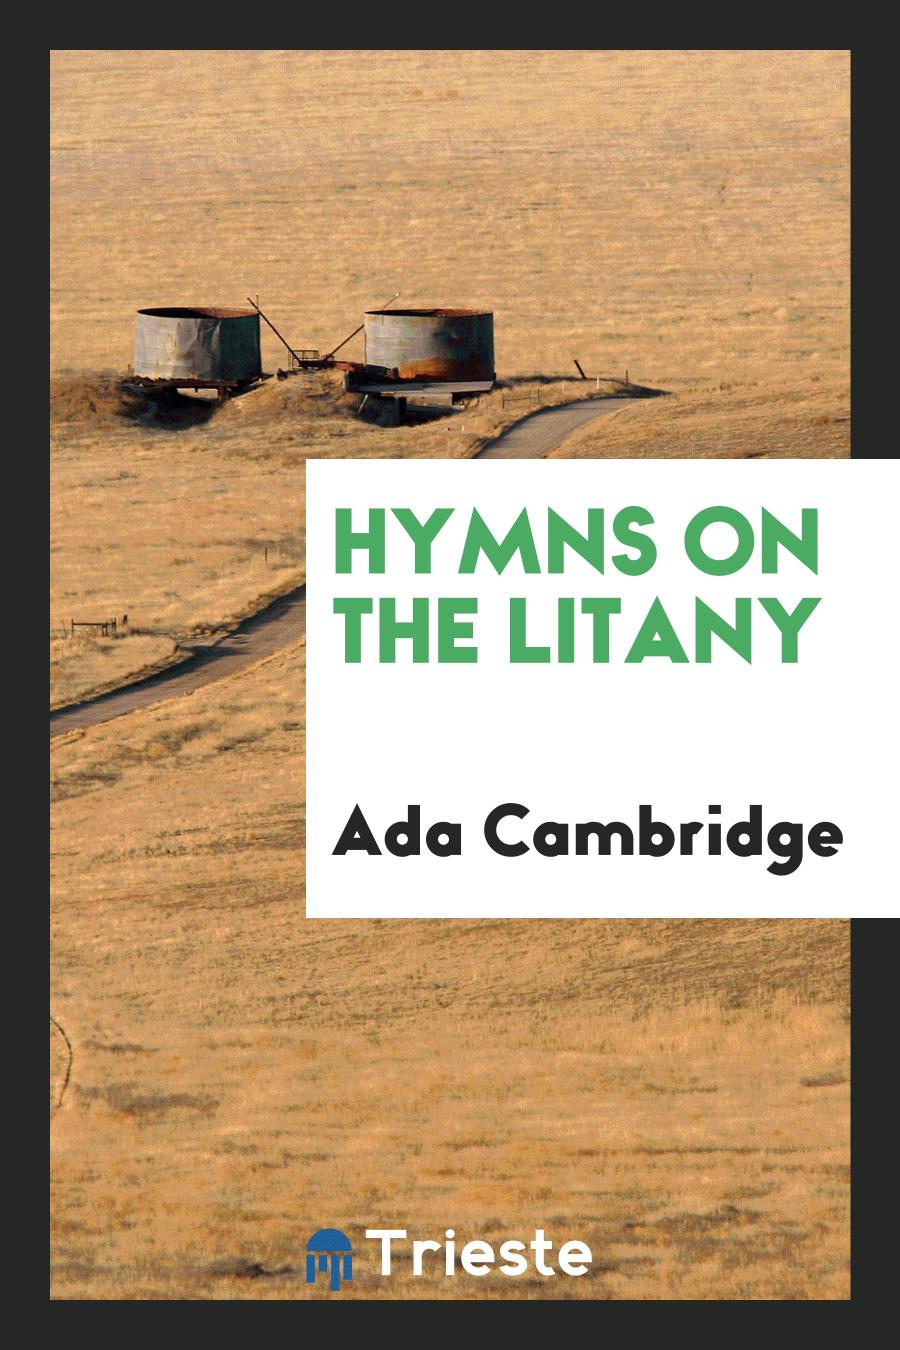 Hymns on the Litany